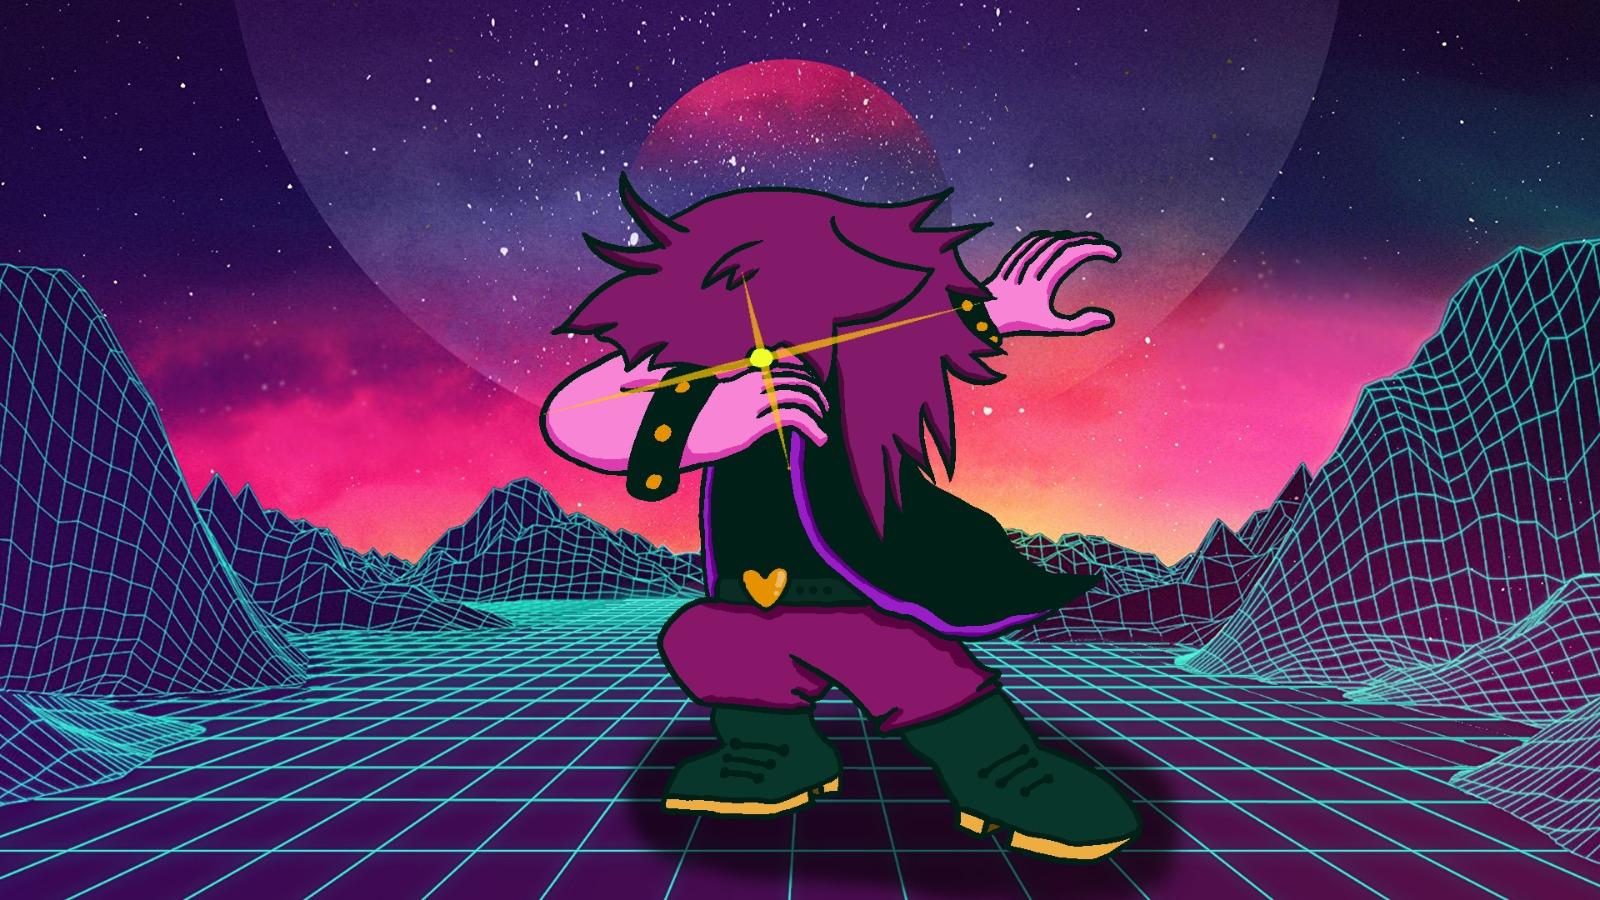 Tought I'd share my Susie wallpaper